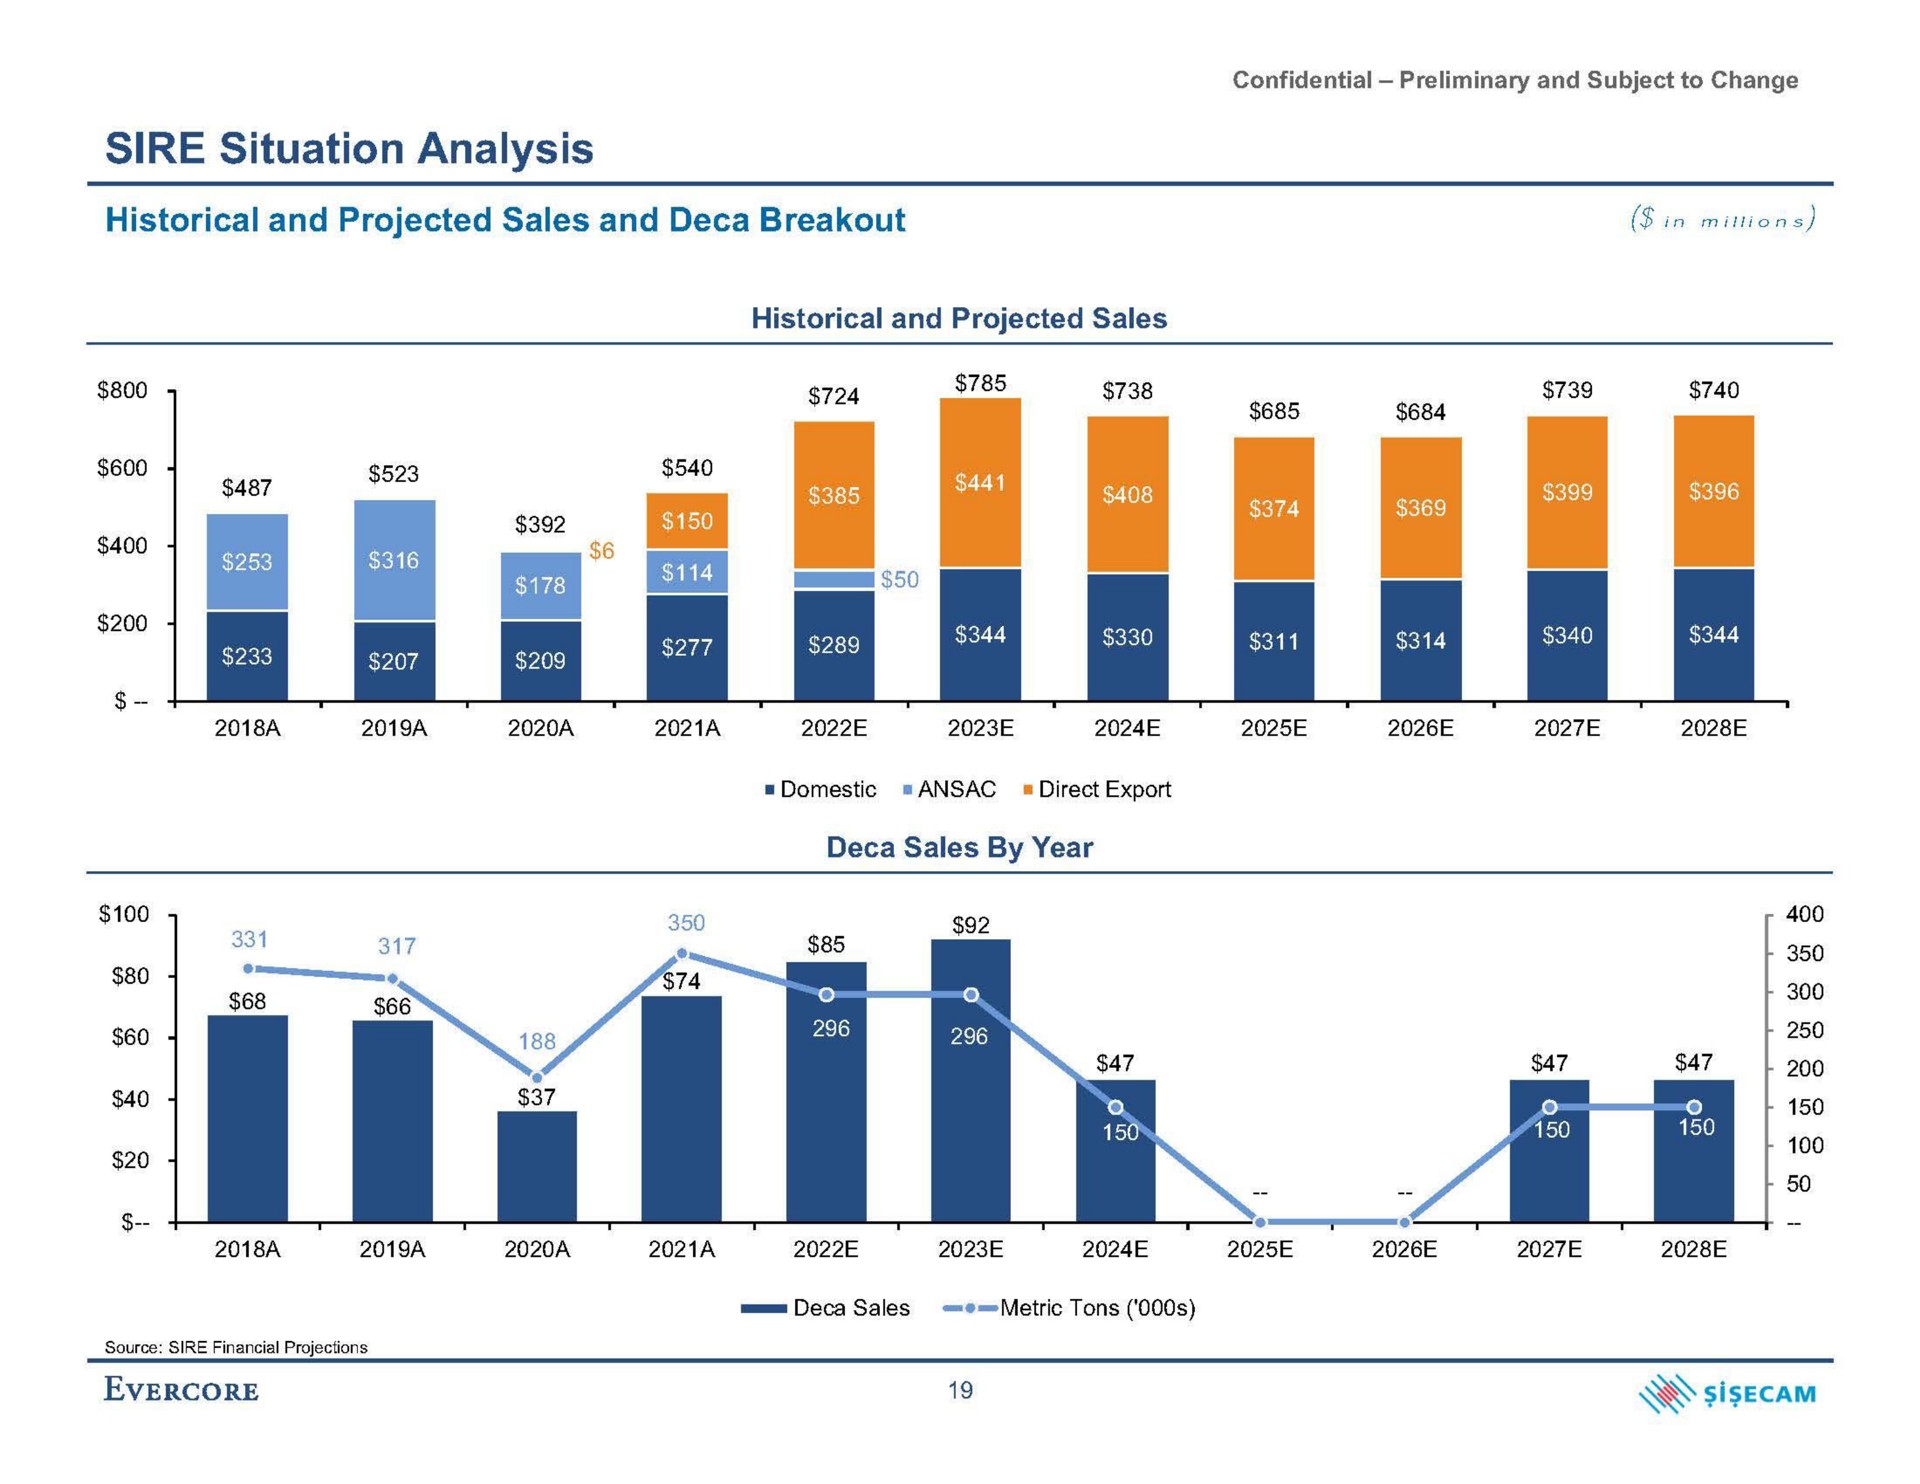 sire situation analysis historical and projected sales and breakout in | Evercore